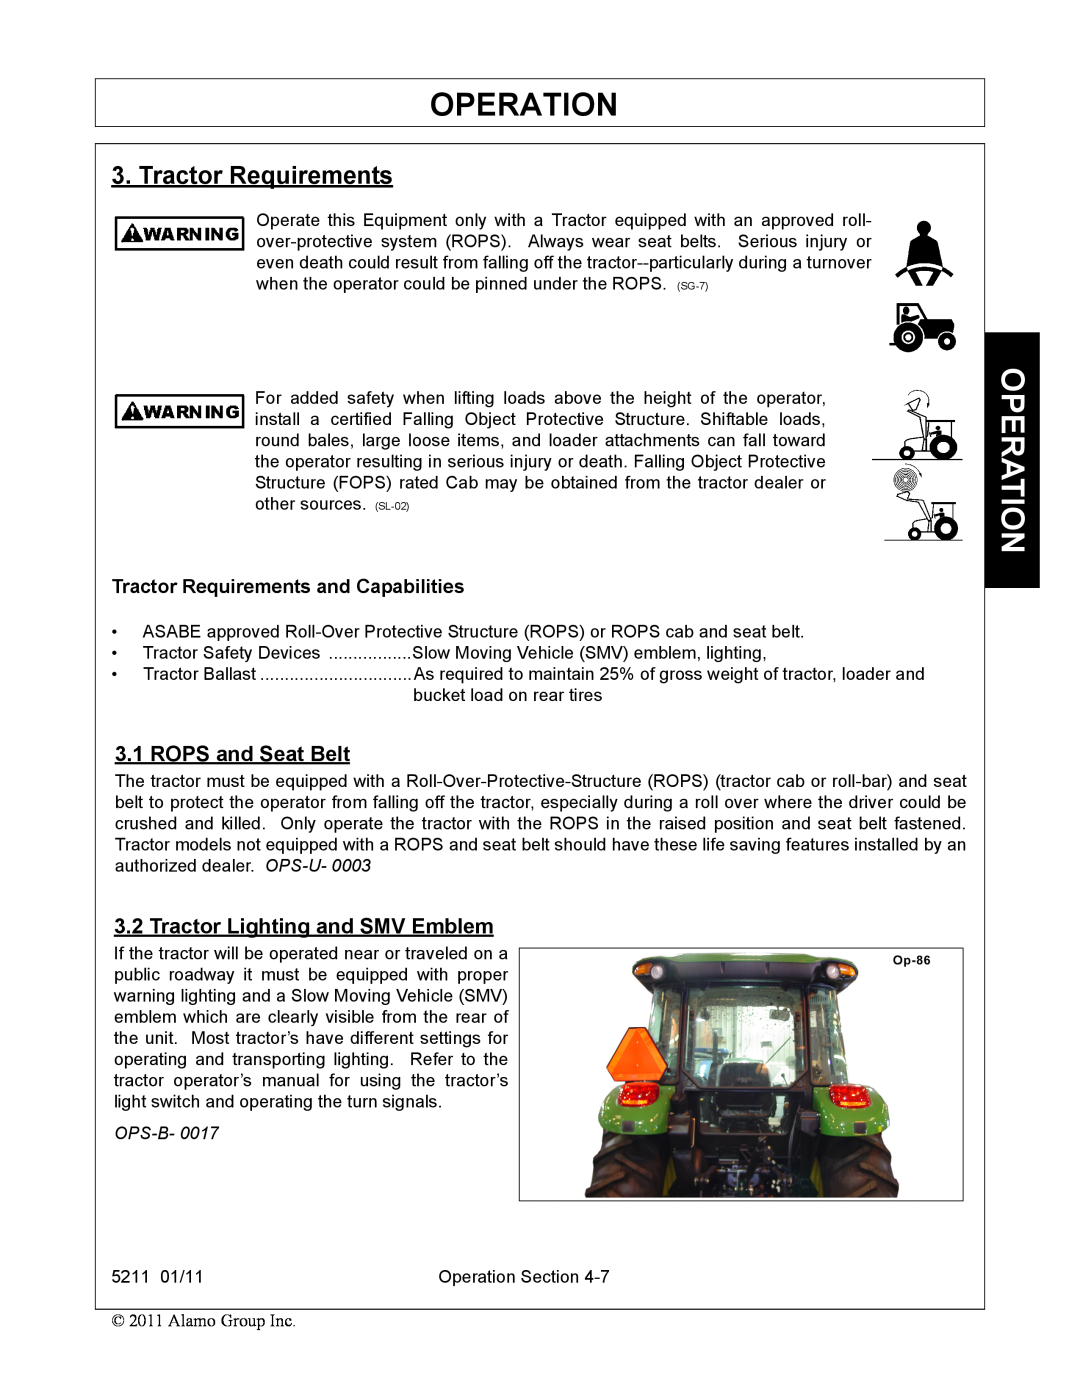 Servis-Rhino 5211 manual Operation, Tractor Requirements, ROPS and Seat Belt, Tractor Lighting and SMV Emblem, Ops-B 